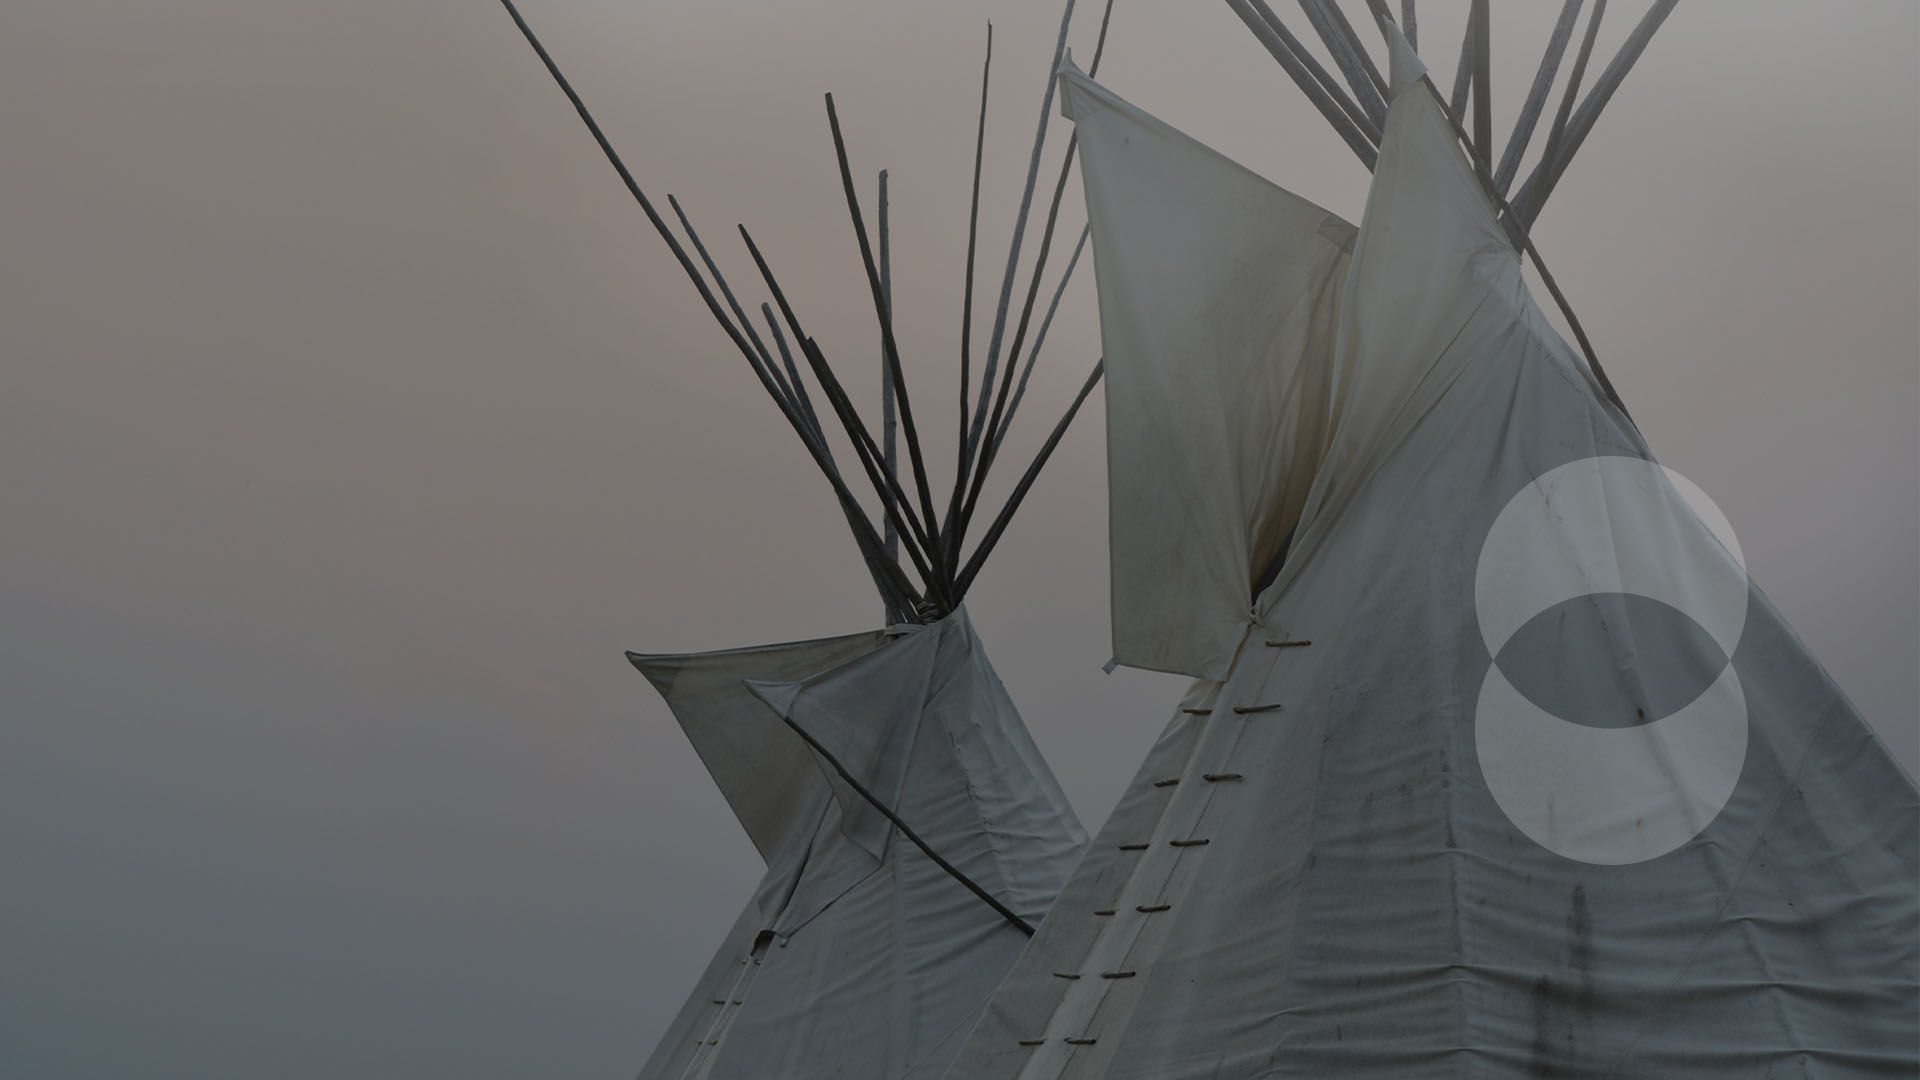 Two Indigenous conical shelters on a foggy sky backdrop